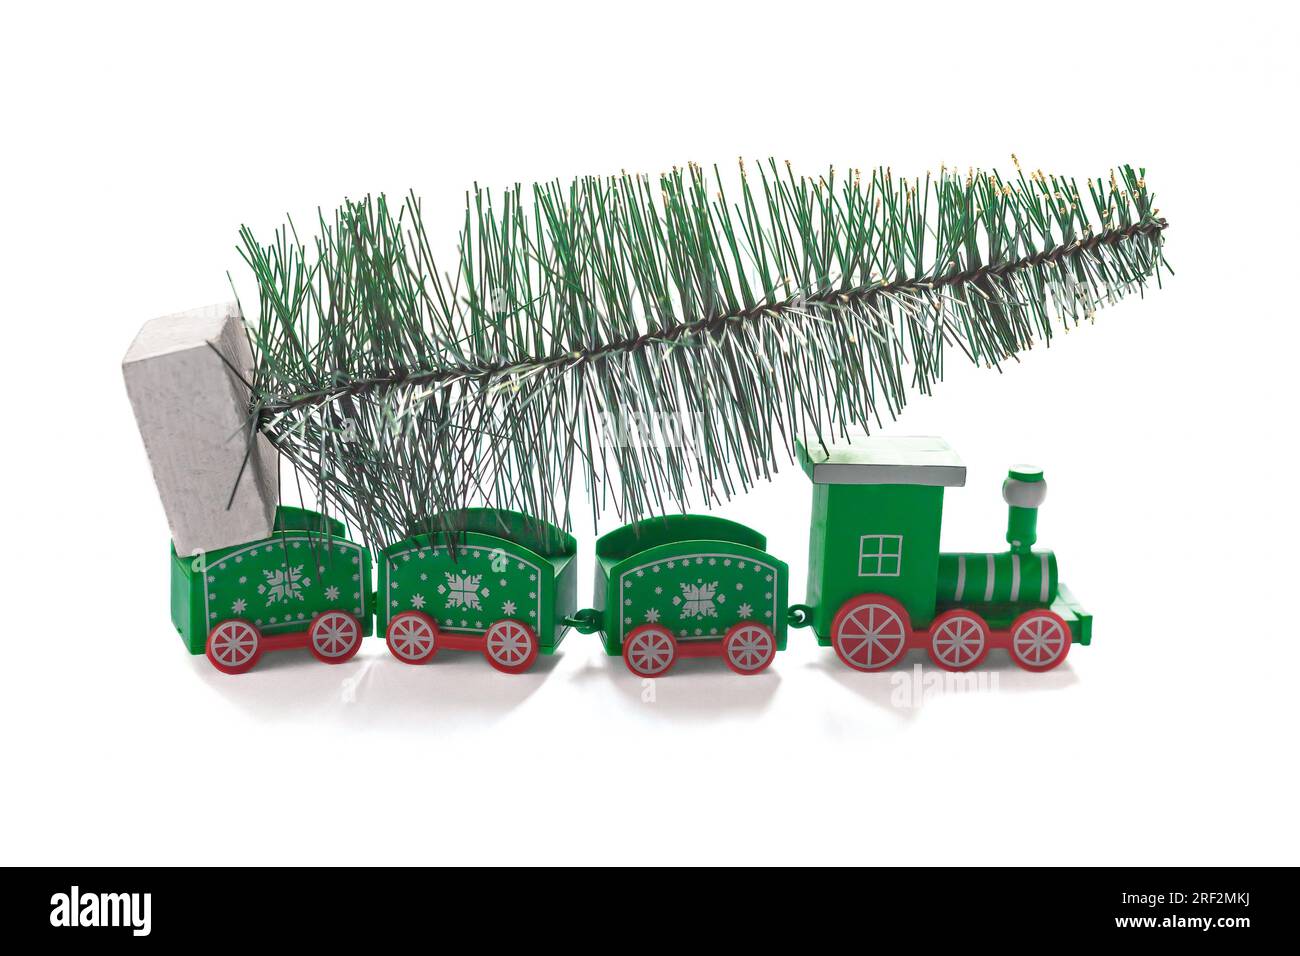 Figurine Toy Christmas train in green color carries a Christmas tree on a white background, an image for a decorative concept of the Christmas holiday Stock Photo